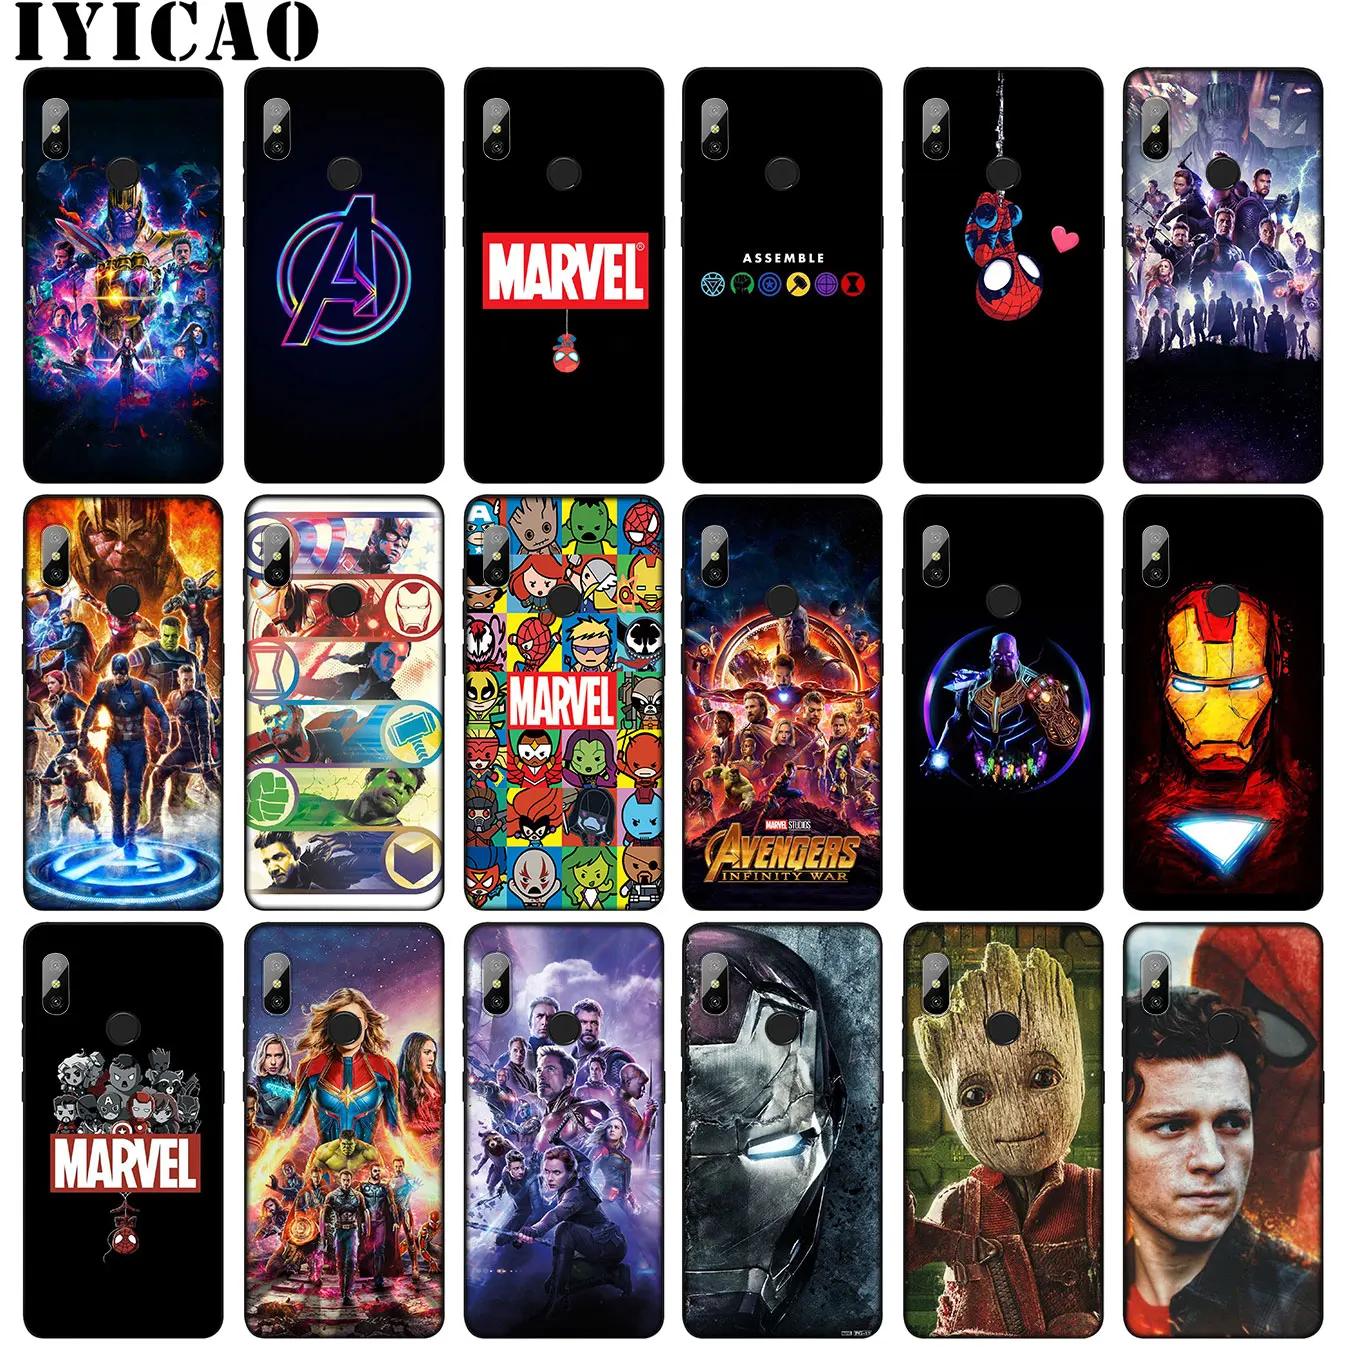 

Avengers Endgame Marvel Spider Iron Man Thanos Soft Phone Case for Xiaomi Redmi K20 7A 6A Note 8 7 5 6 Pro Tom Holland Cover